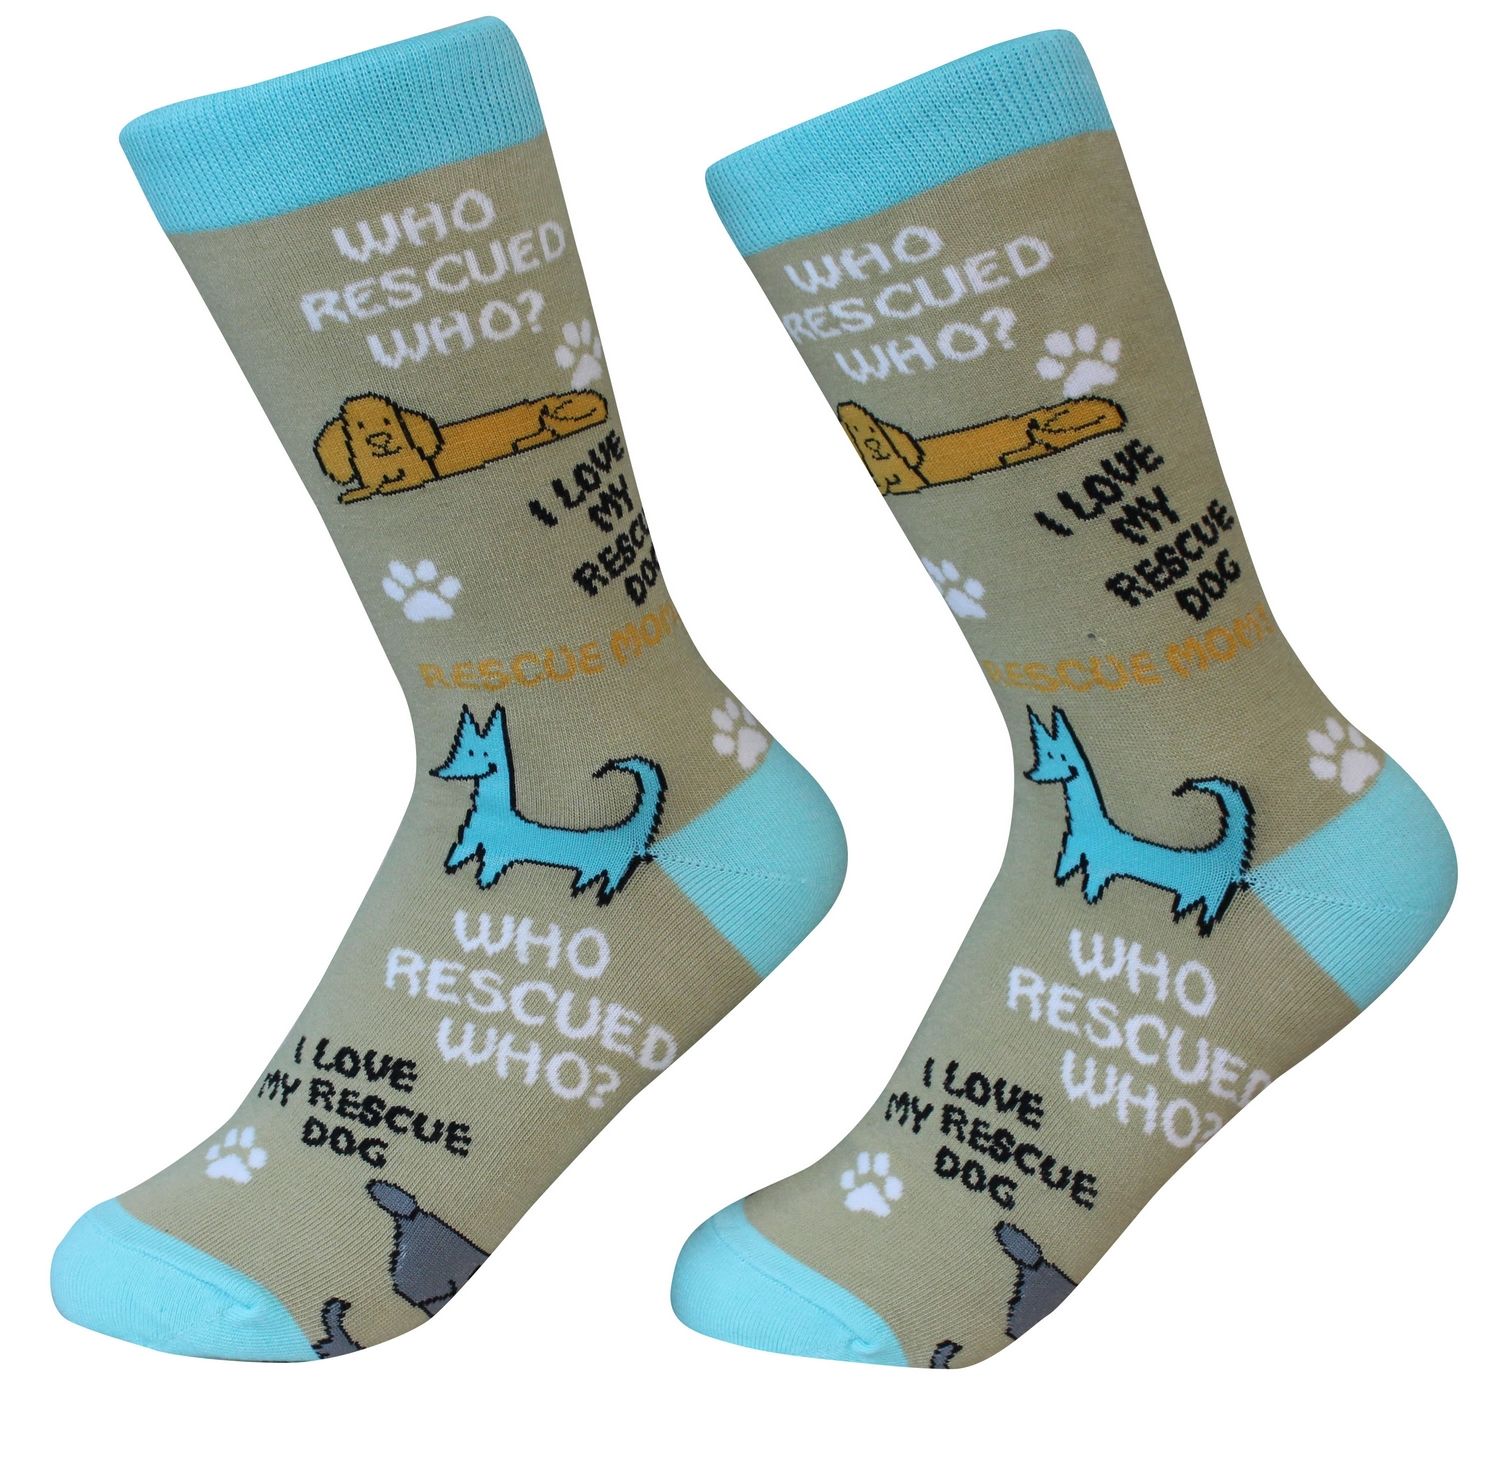 Who Rescued Who? Socks - Unisex